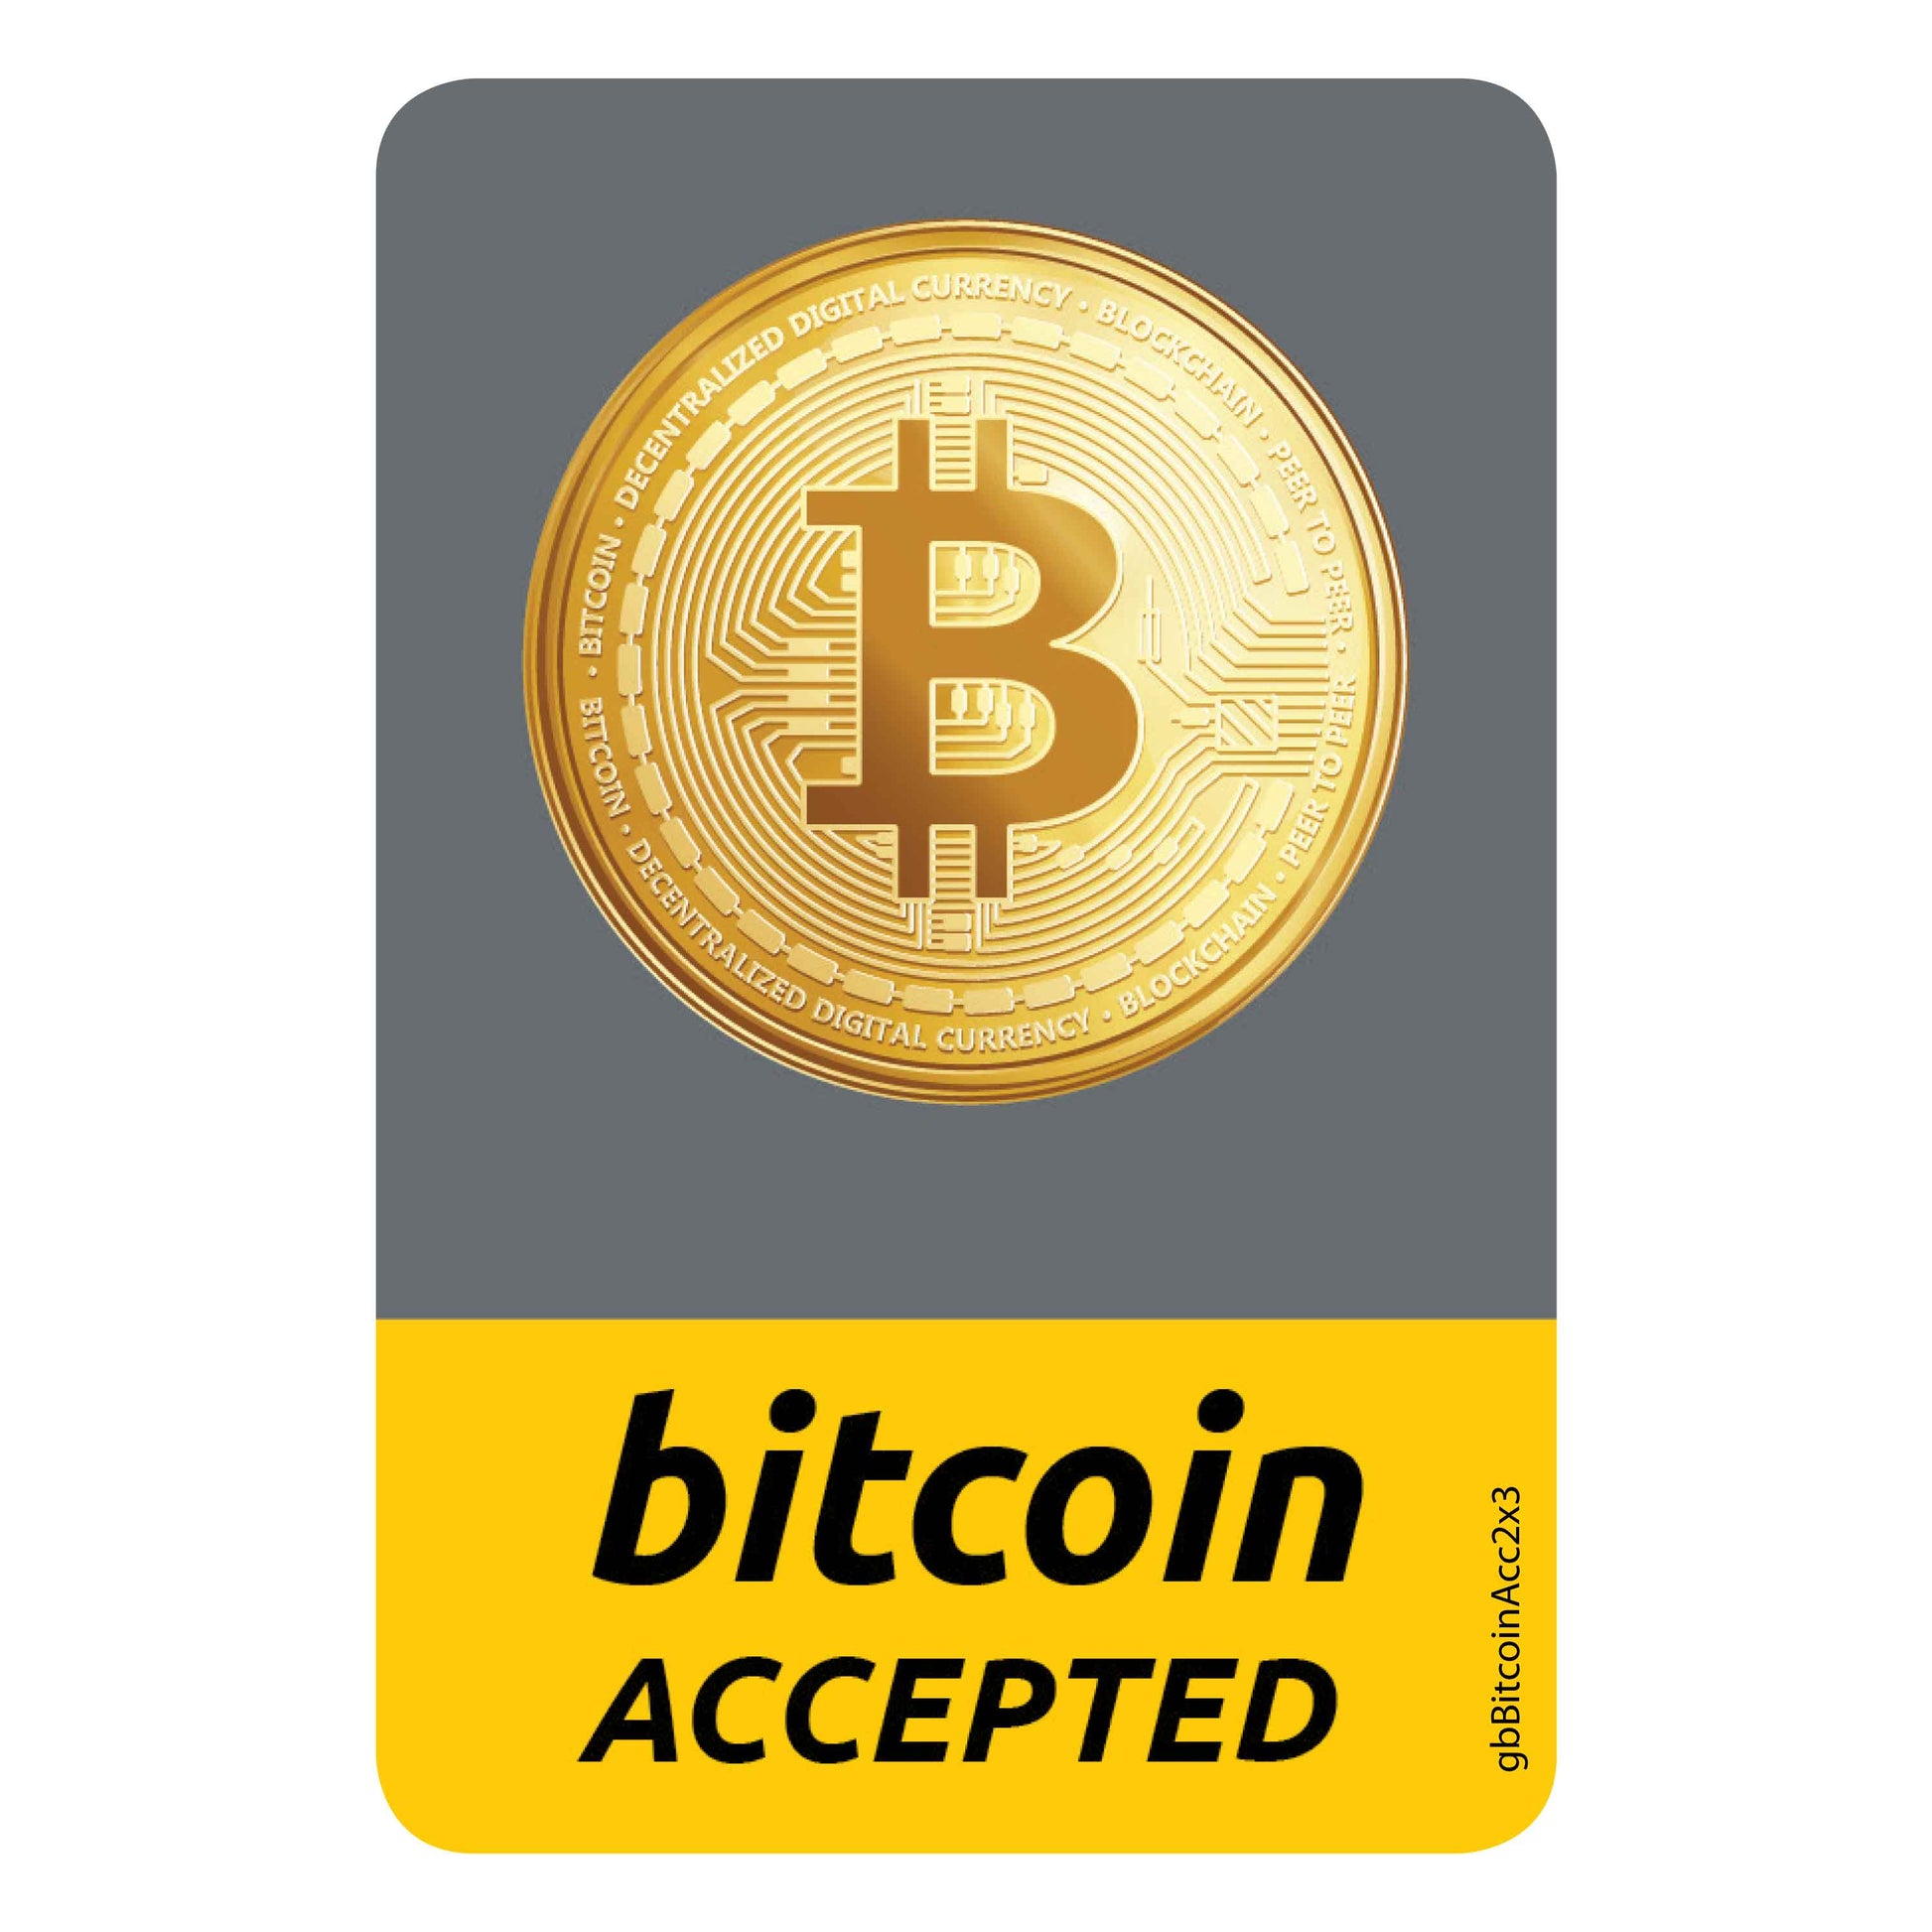 Bitcoin Accepted Decal. 2 inches by 3 inches in size.